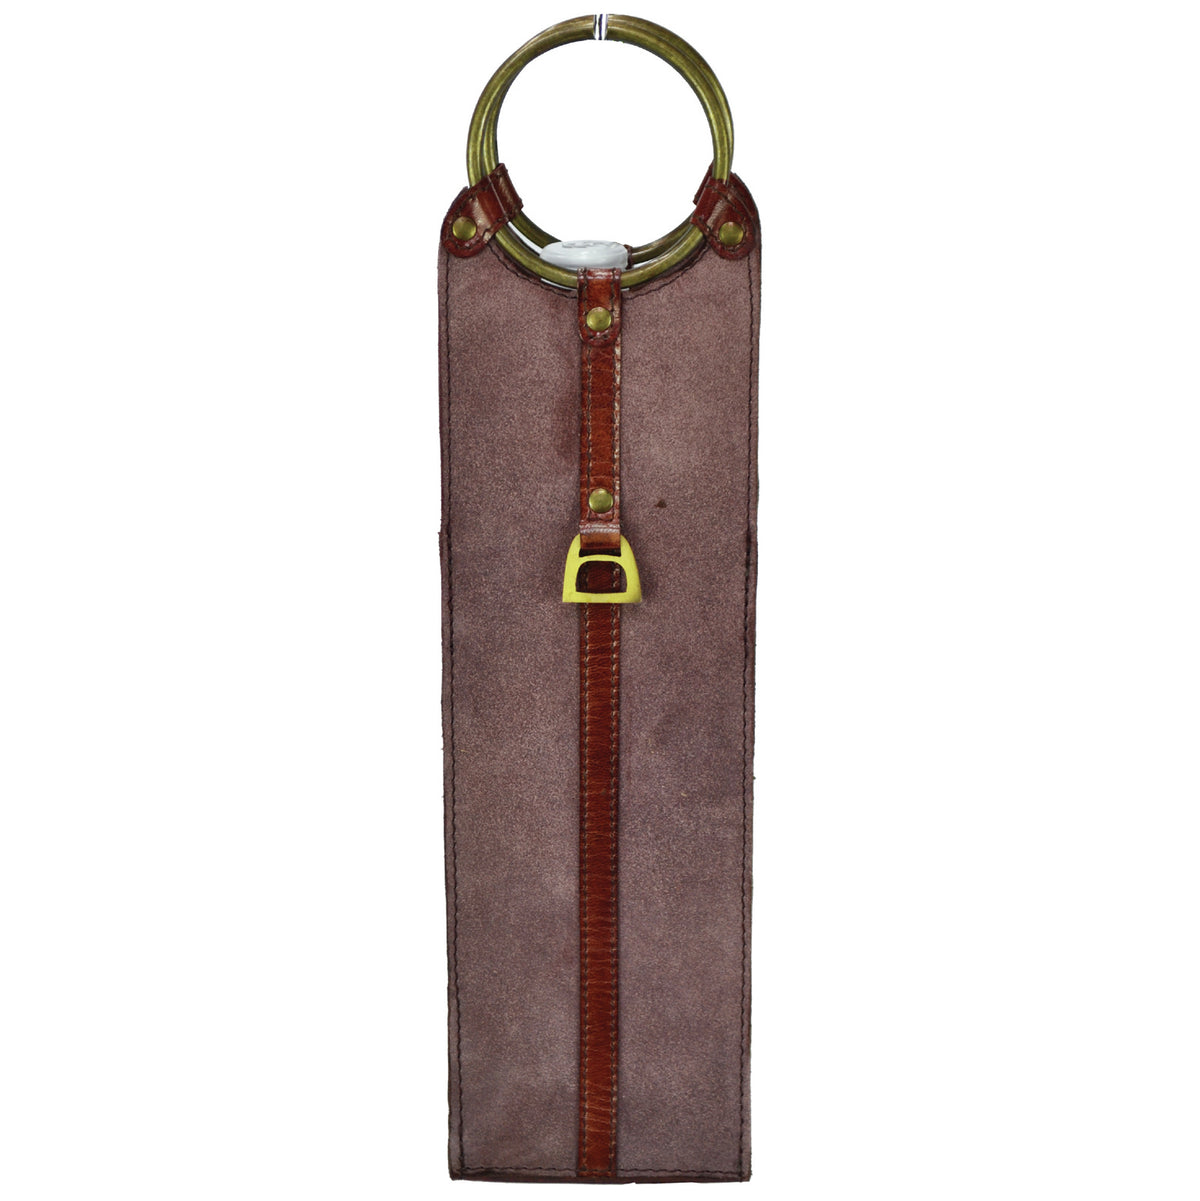 Dorath Purple Suede Leather Single Wine Holder with Ring Handles - Notbrand